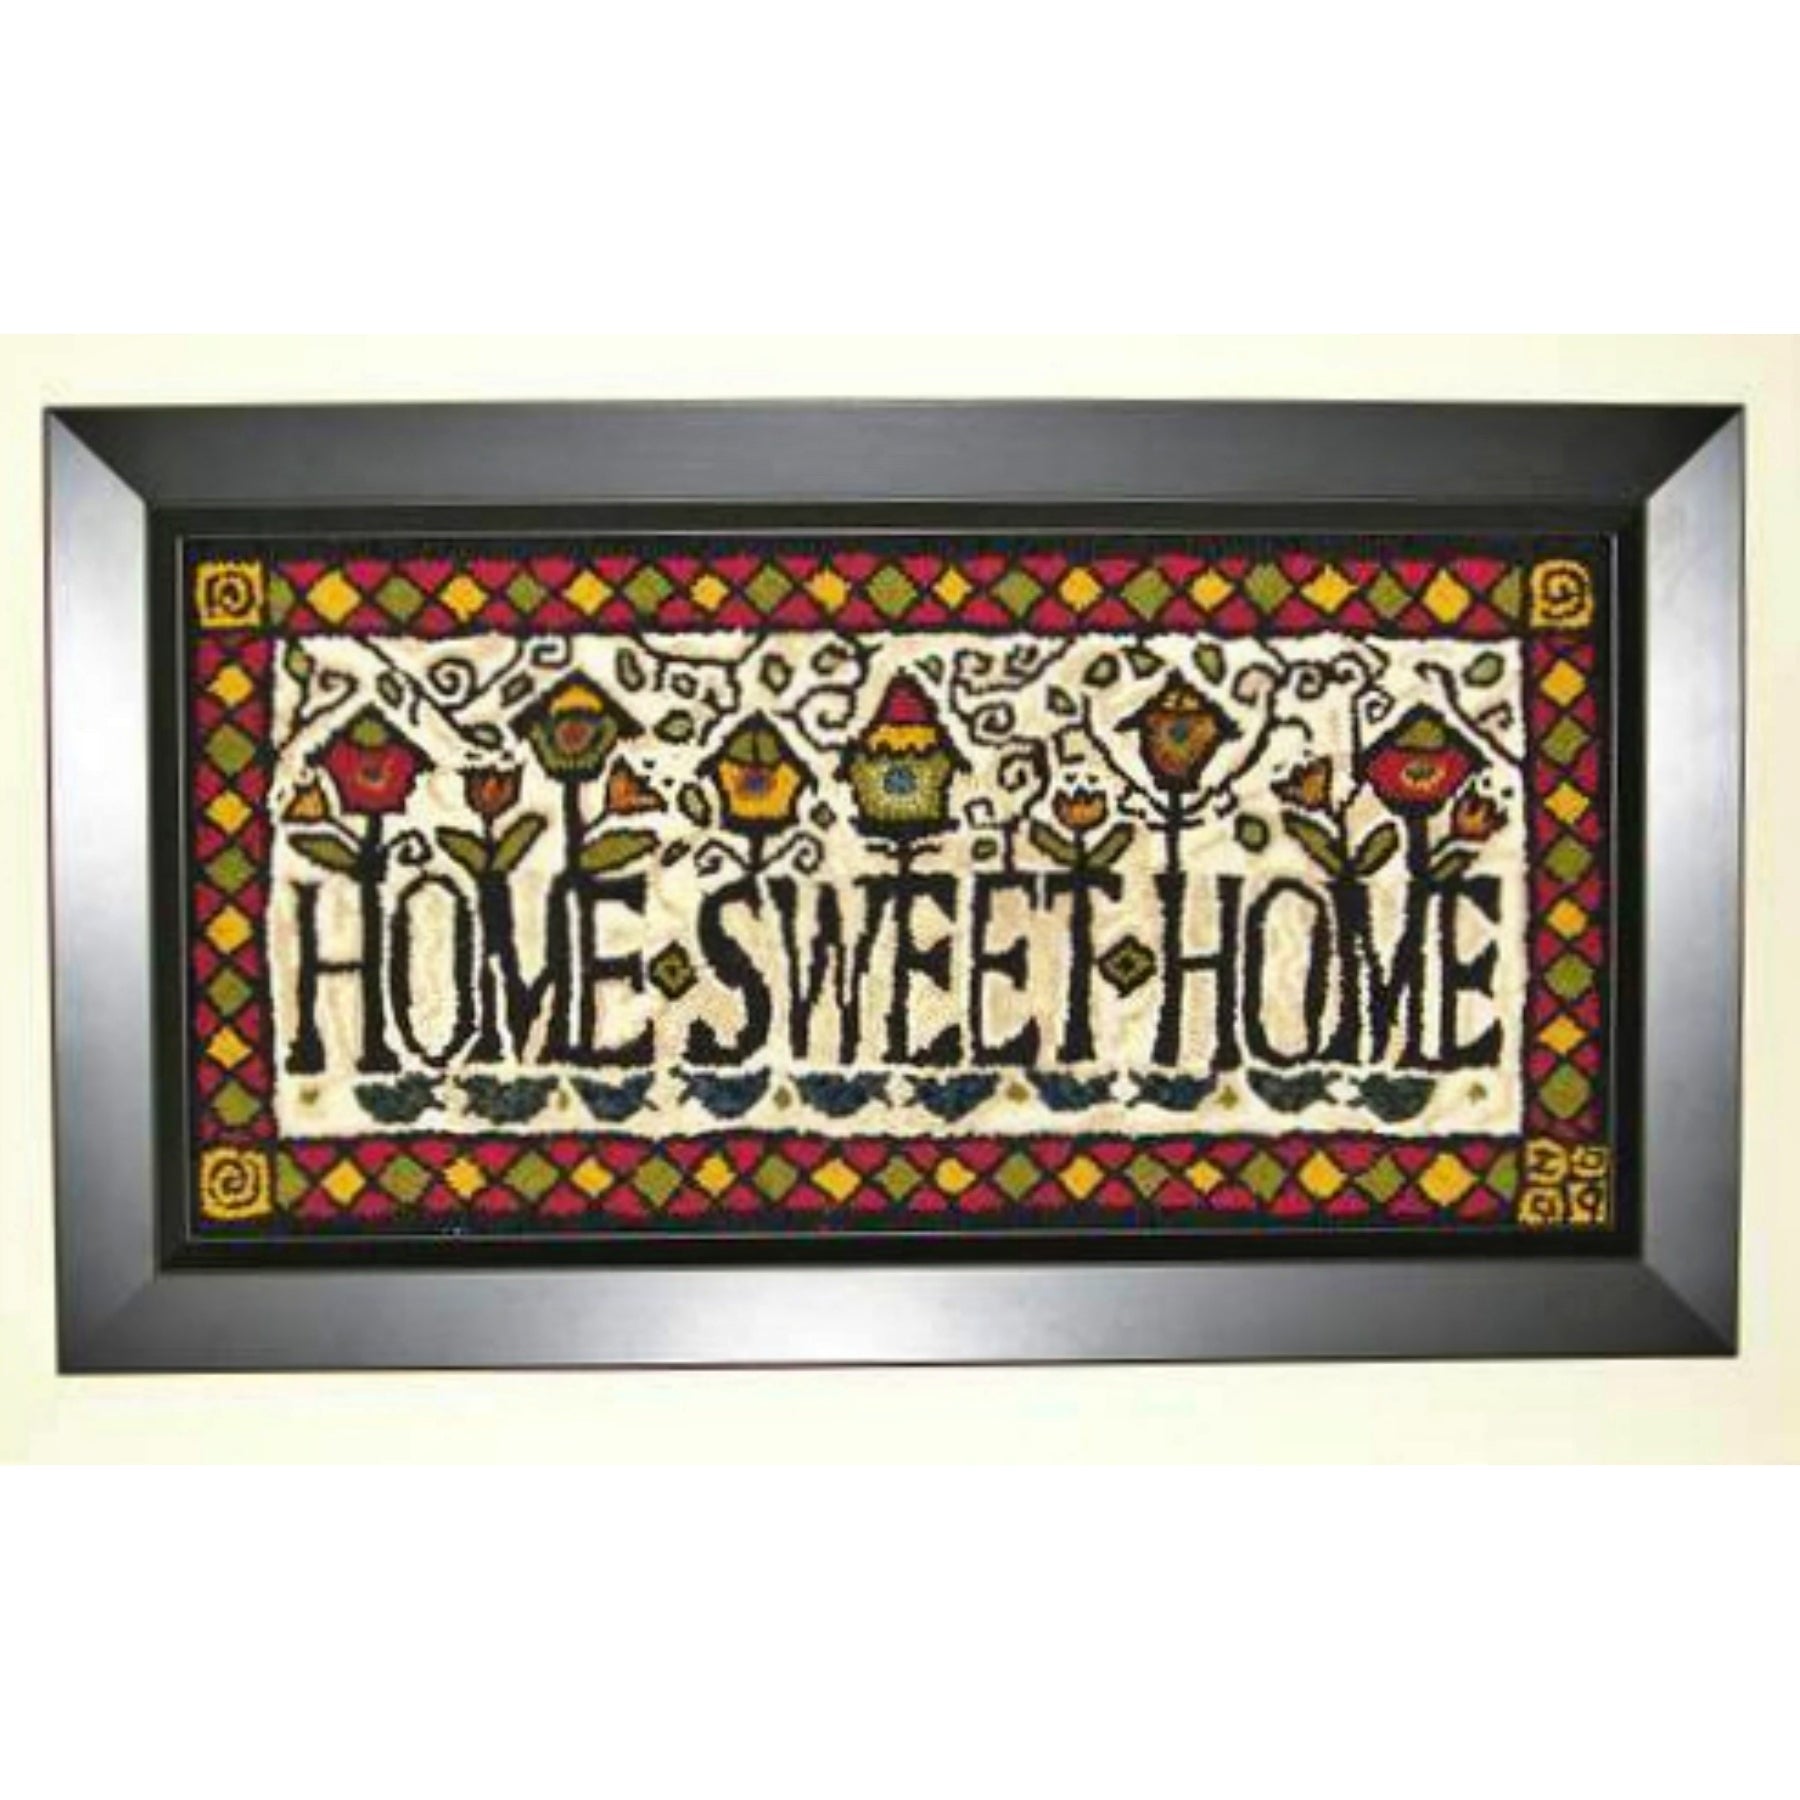 Home Sweet Home, rug hooked by Louise Tessier